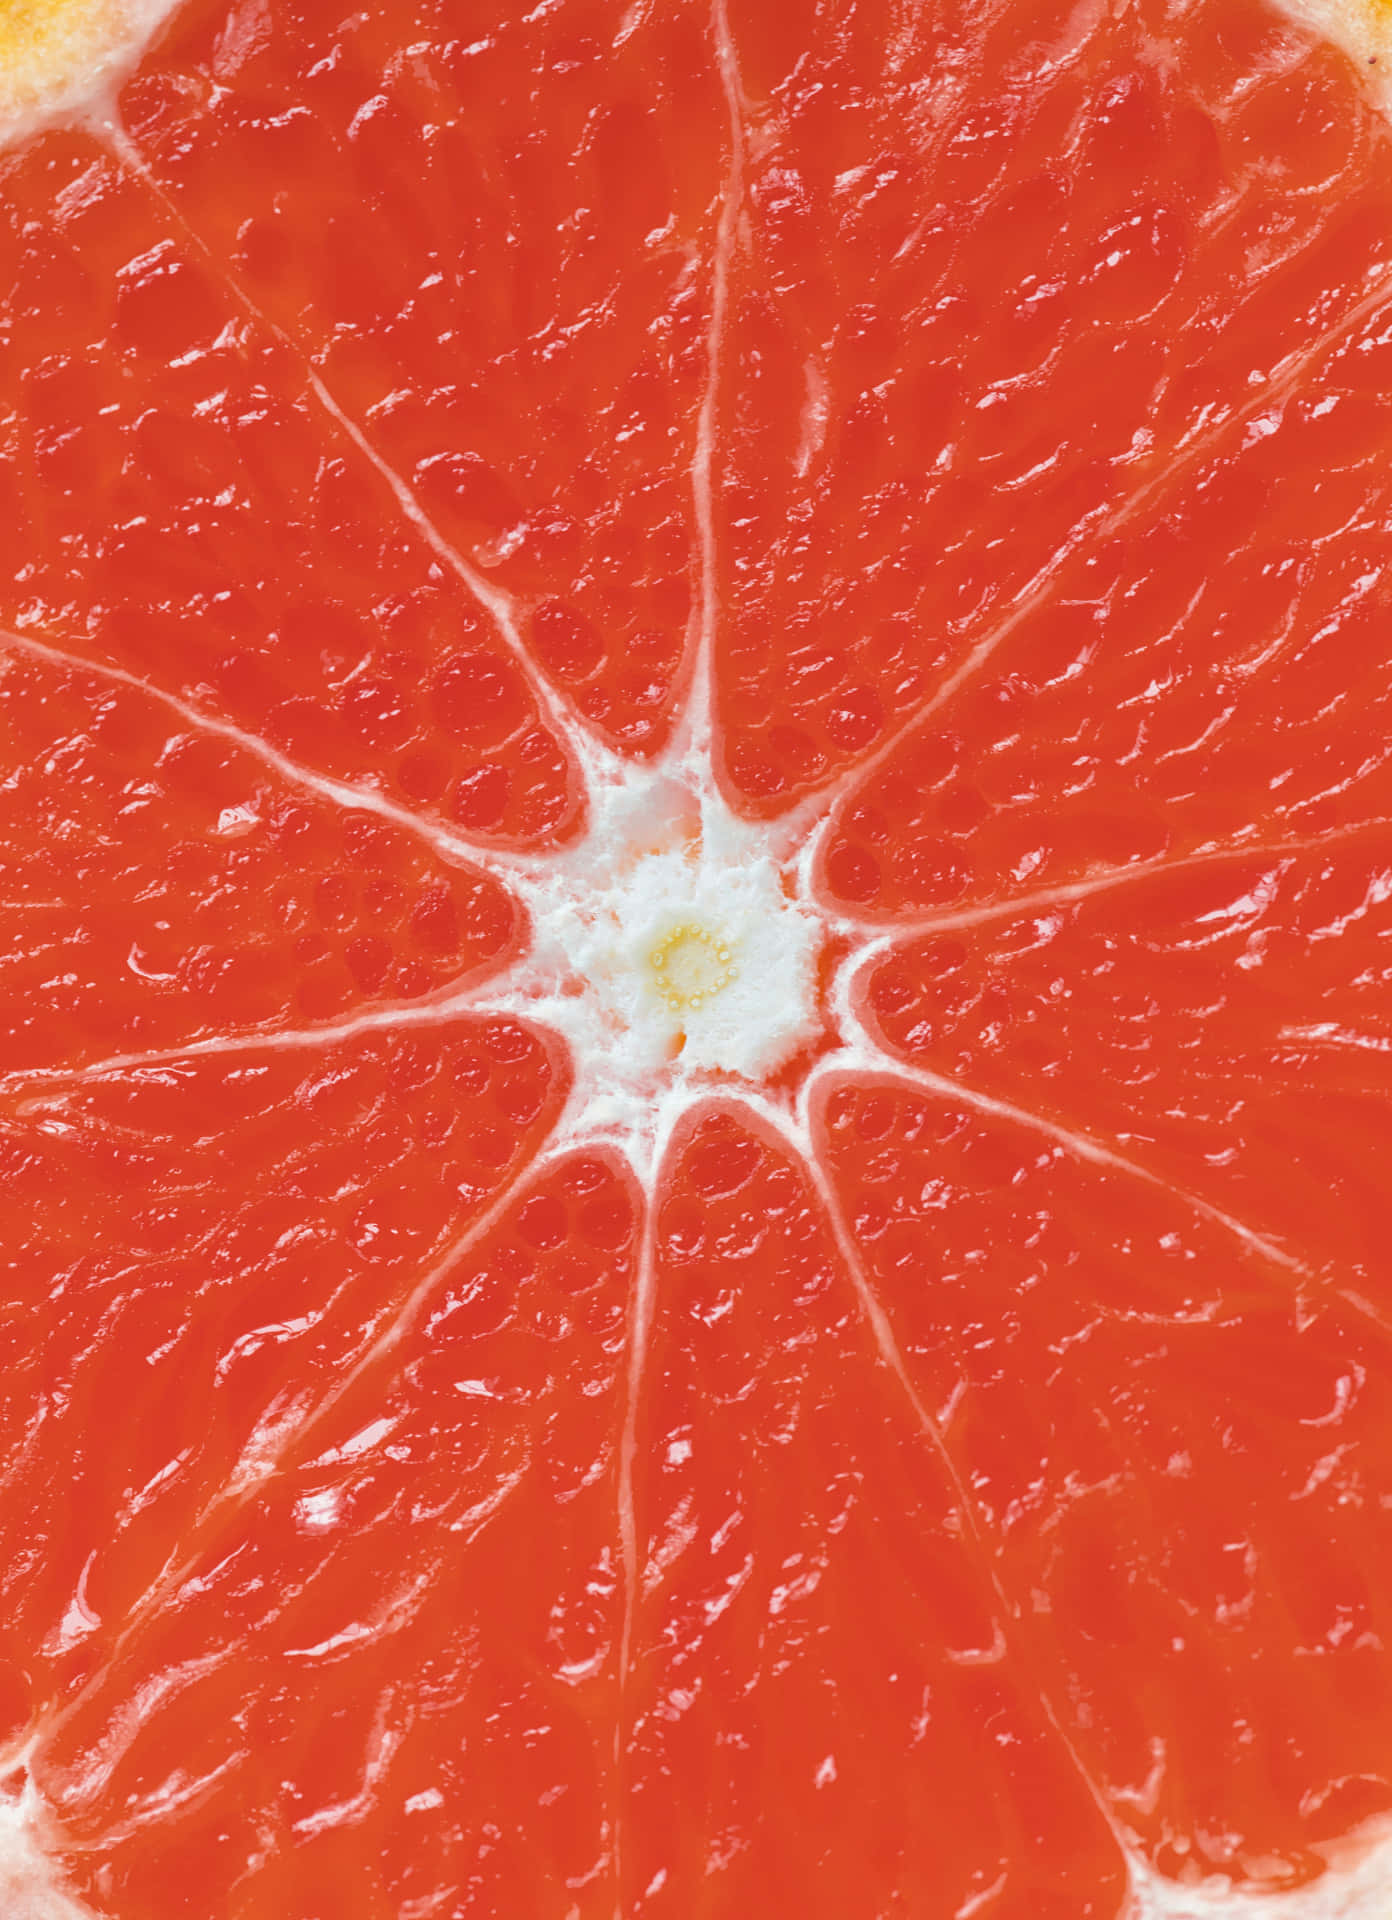 Caption: Fresh and Juicy Pink Grapefruit Slices Wallpaper